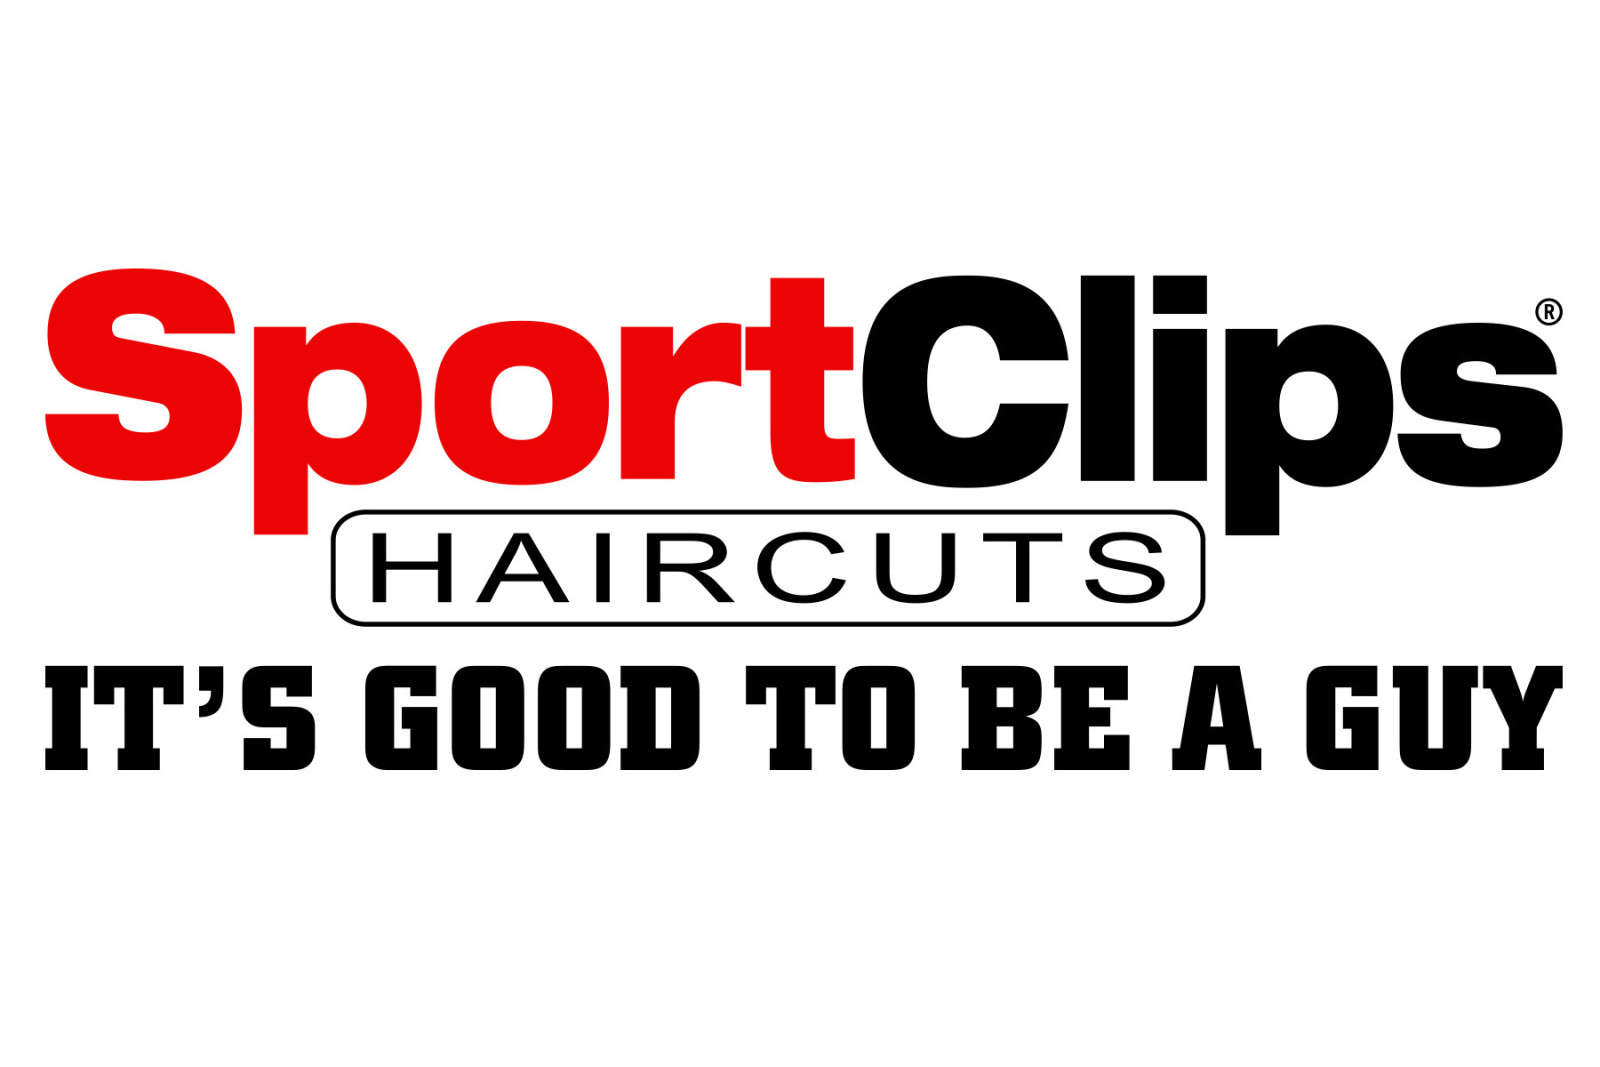 sports clips